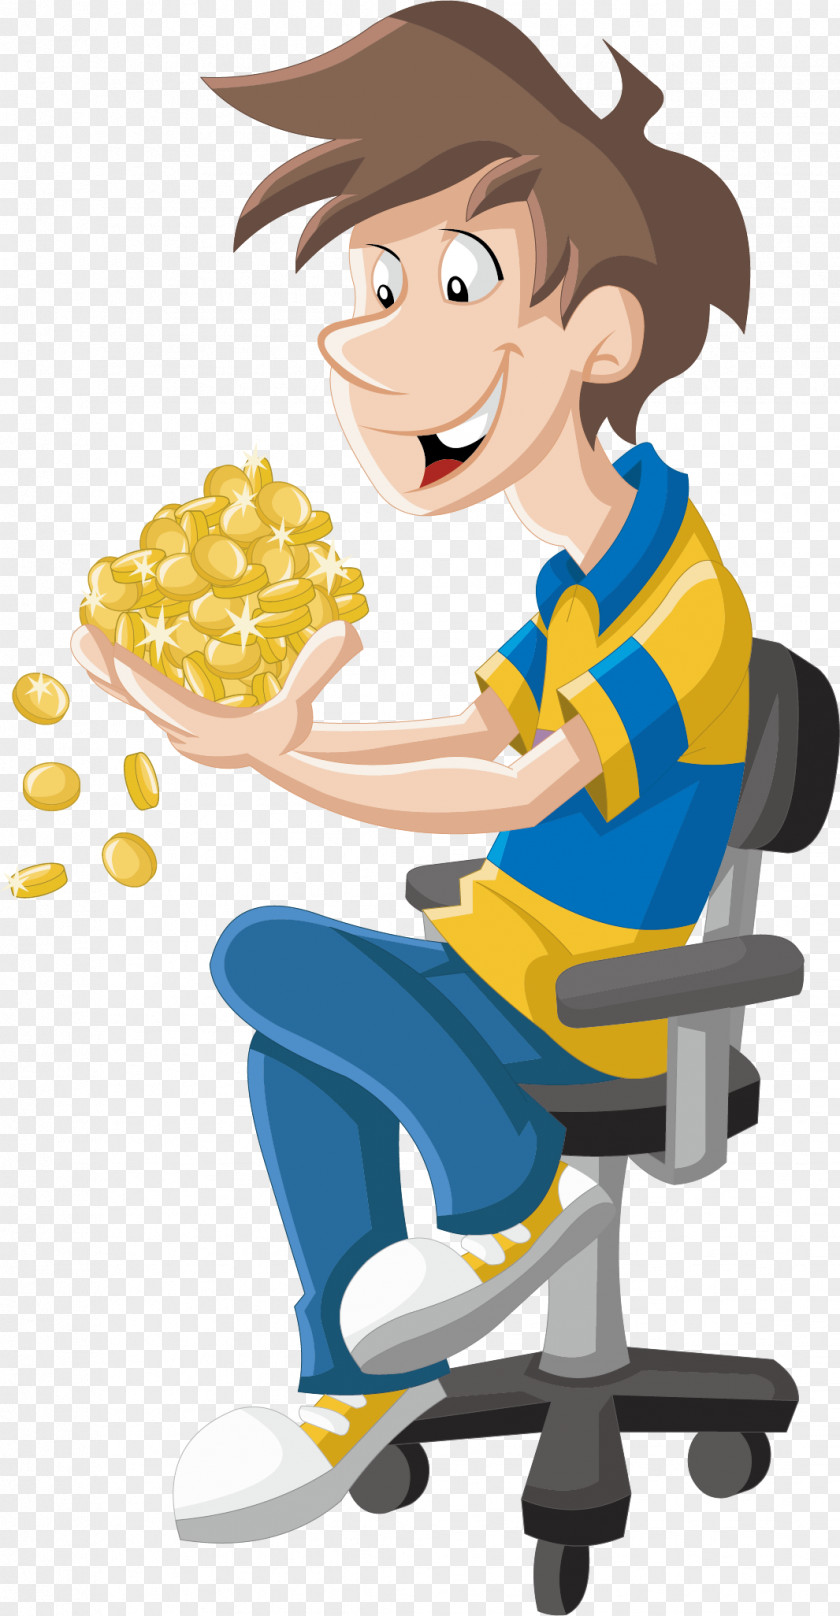 Men 's Gold Coin Poster Promotional Material Cartoon Royalty-free Clip Art PNG